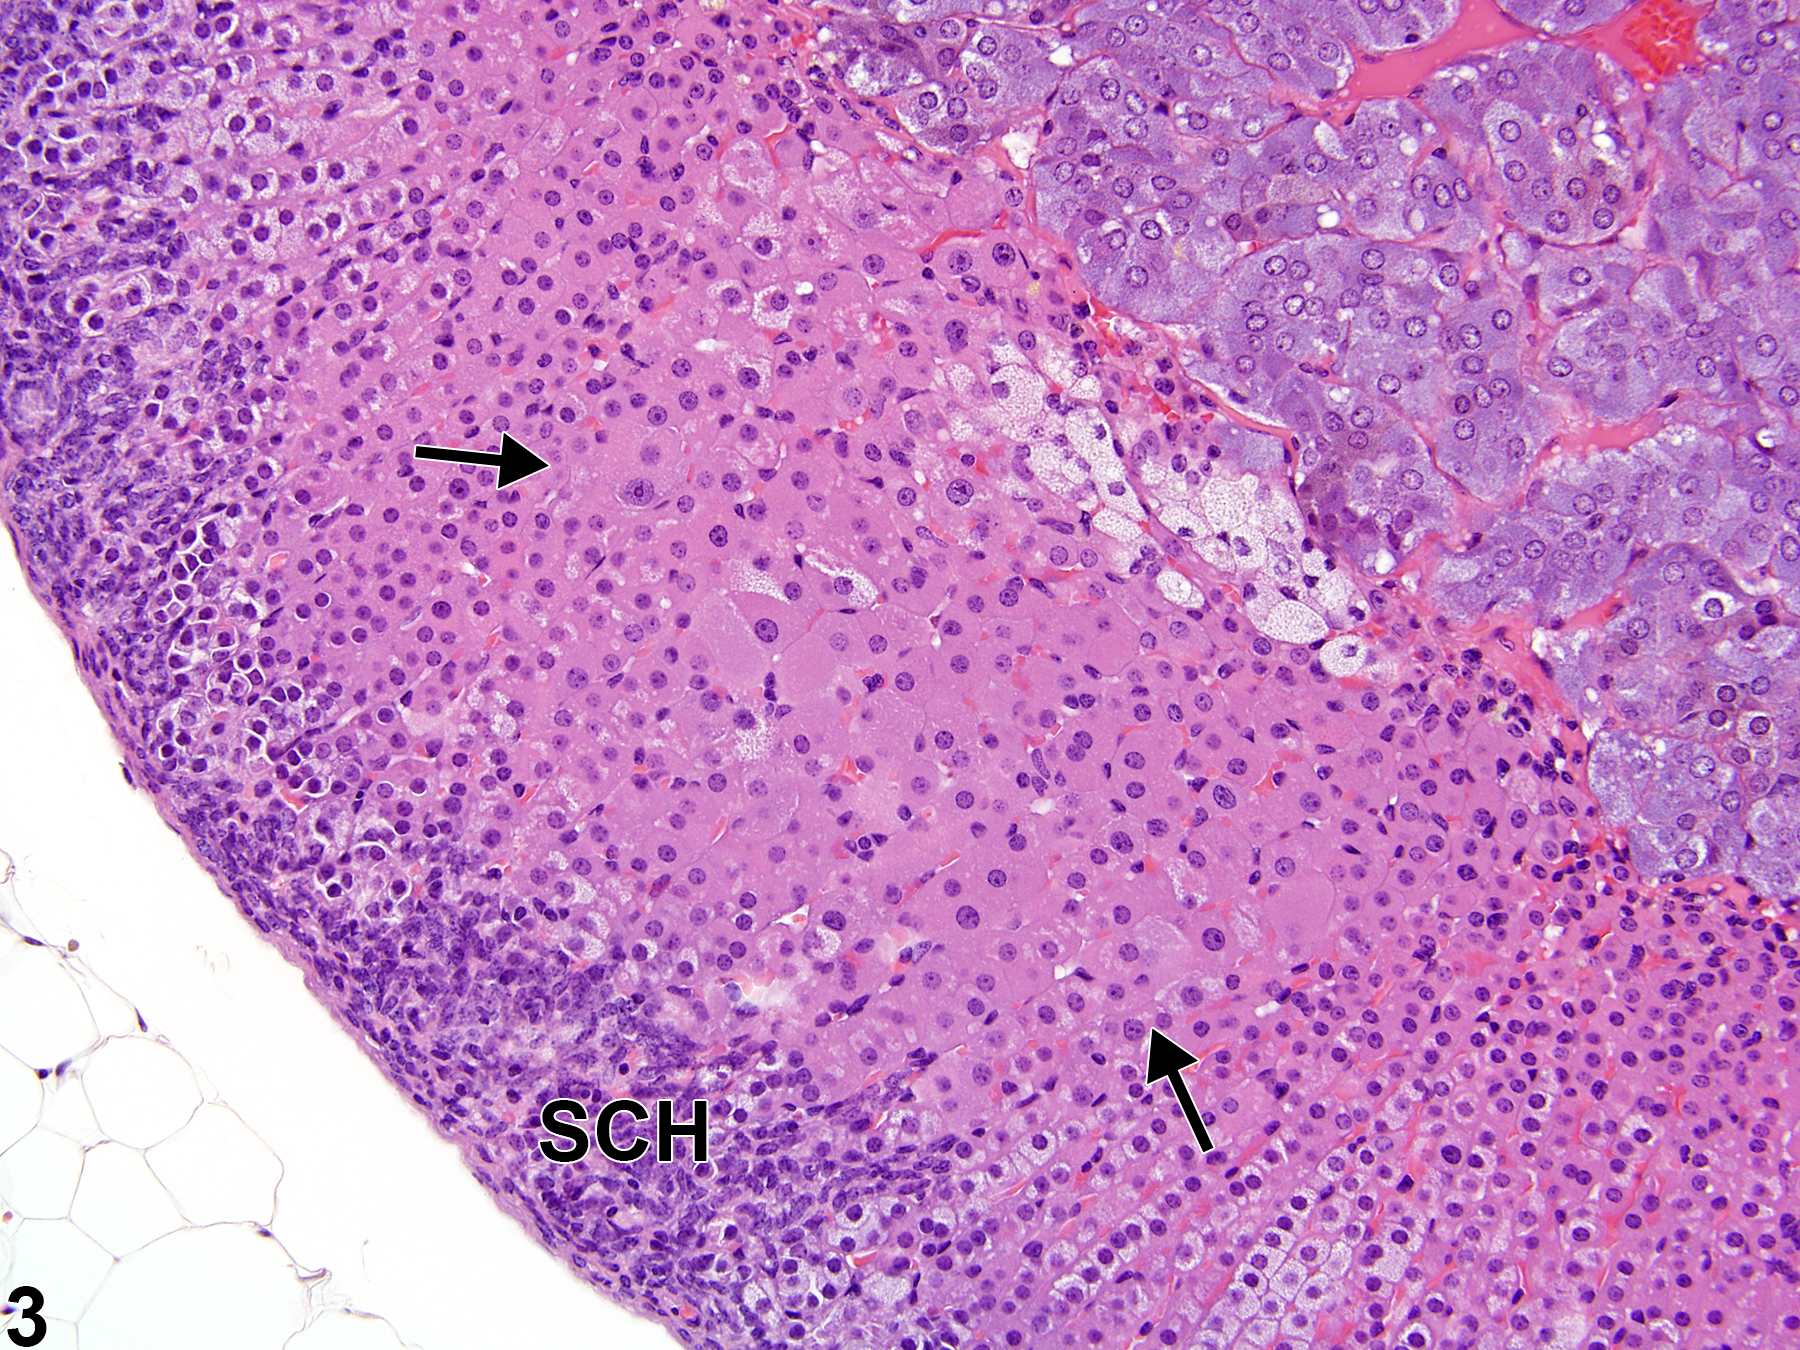 Image of hypertrophy in the adrenal gland cortex from a male B6C3F1/N mouse in a chronic study